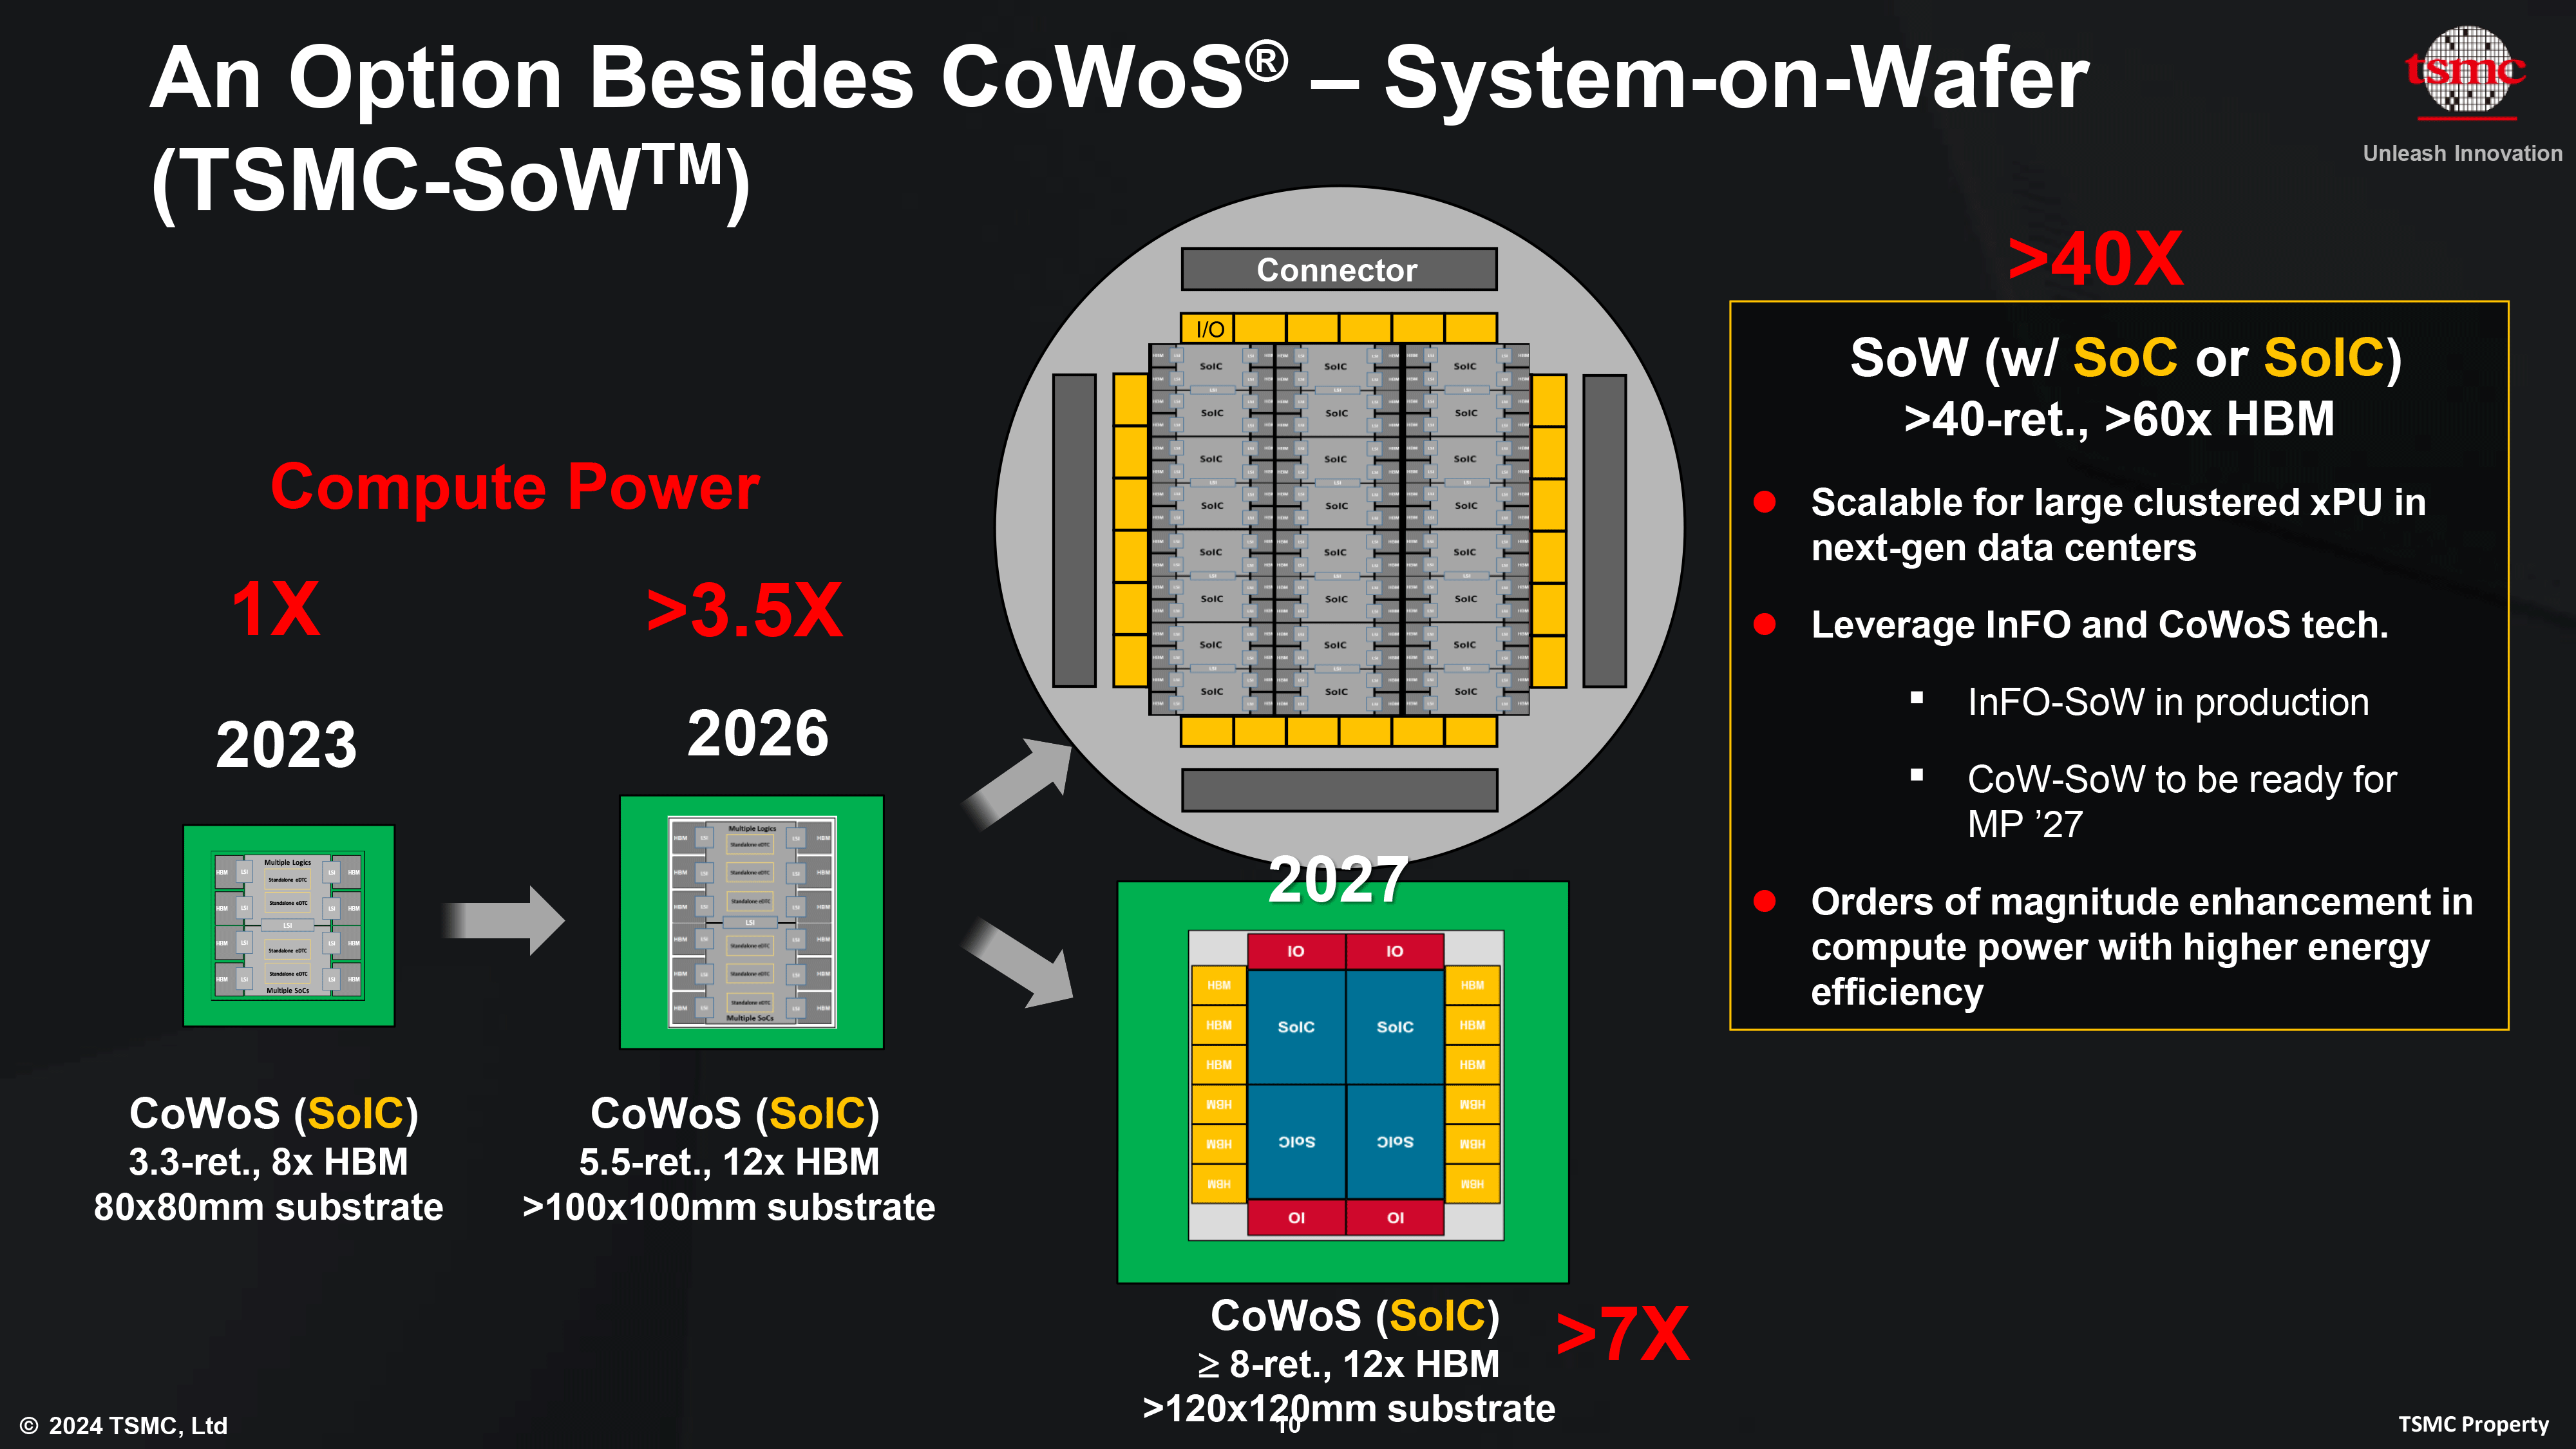 tsmc-sow-cowos-evolution.png